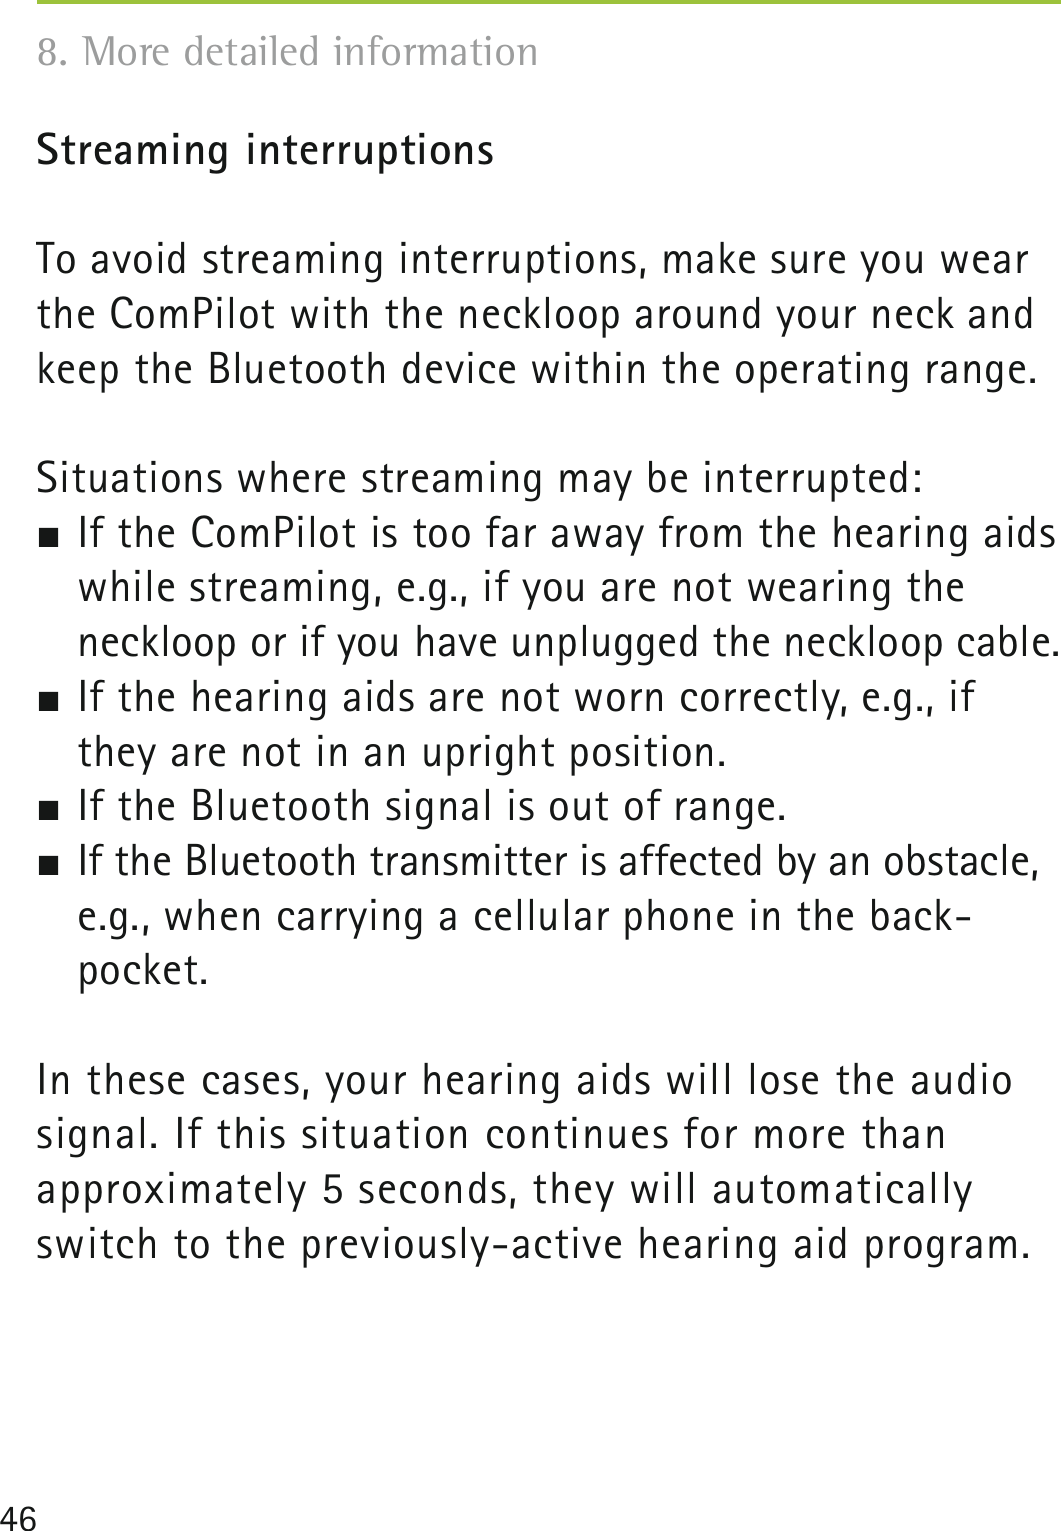 46Streaming interruptionsTo avoid streaming interruptions, make sure you wear the ComPilot with the neckloop around your neck and keep the Bluetooth device within the operating range.Situations where streaming may be interrupted: If the ComPilot is too far away from the hearing aids while streaming, e.g., if you are not wearing the neckloop or if you have unplugged the neckloop cable. If the hearing aids are not worn correctly, e.g., if they are not in an upright position. If the Bluetooth signal is out of range. If the Bluetooth transmitter is affected by an obstacle, e.g., when carrying a cellular phone in the back- pocket.In these cases, your hearing aids will lose the audio signal. If this situation continues for more than  approximately 5 seconds, they will automatically switch to the previously-active hearing aid program.8. More detailed information 